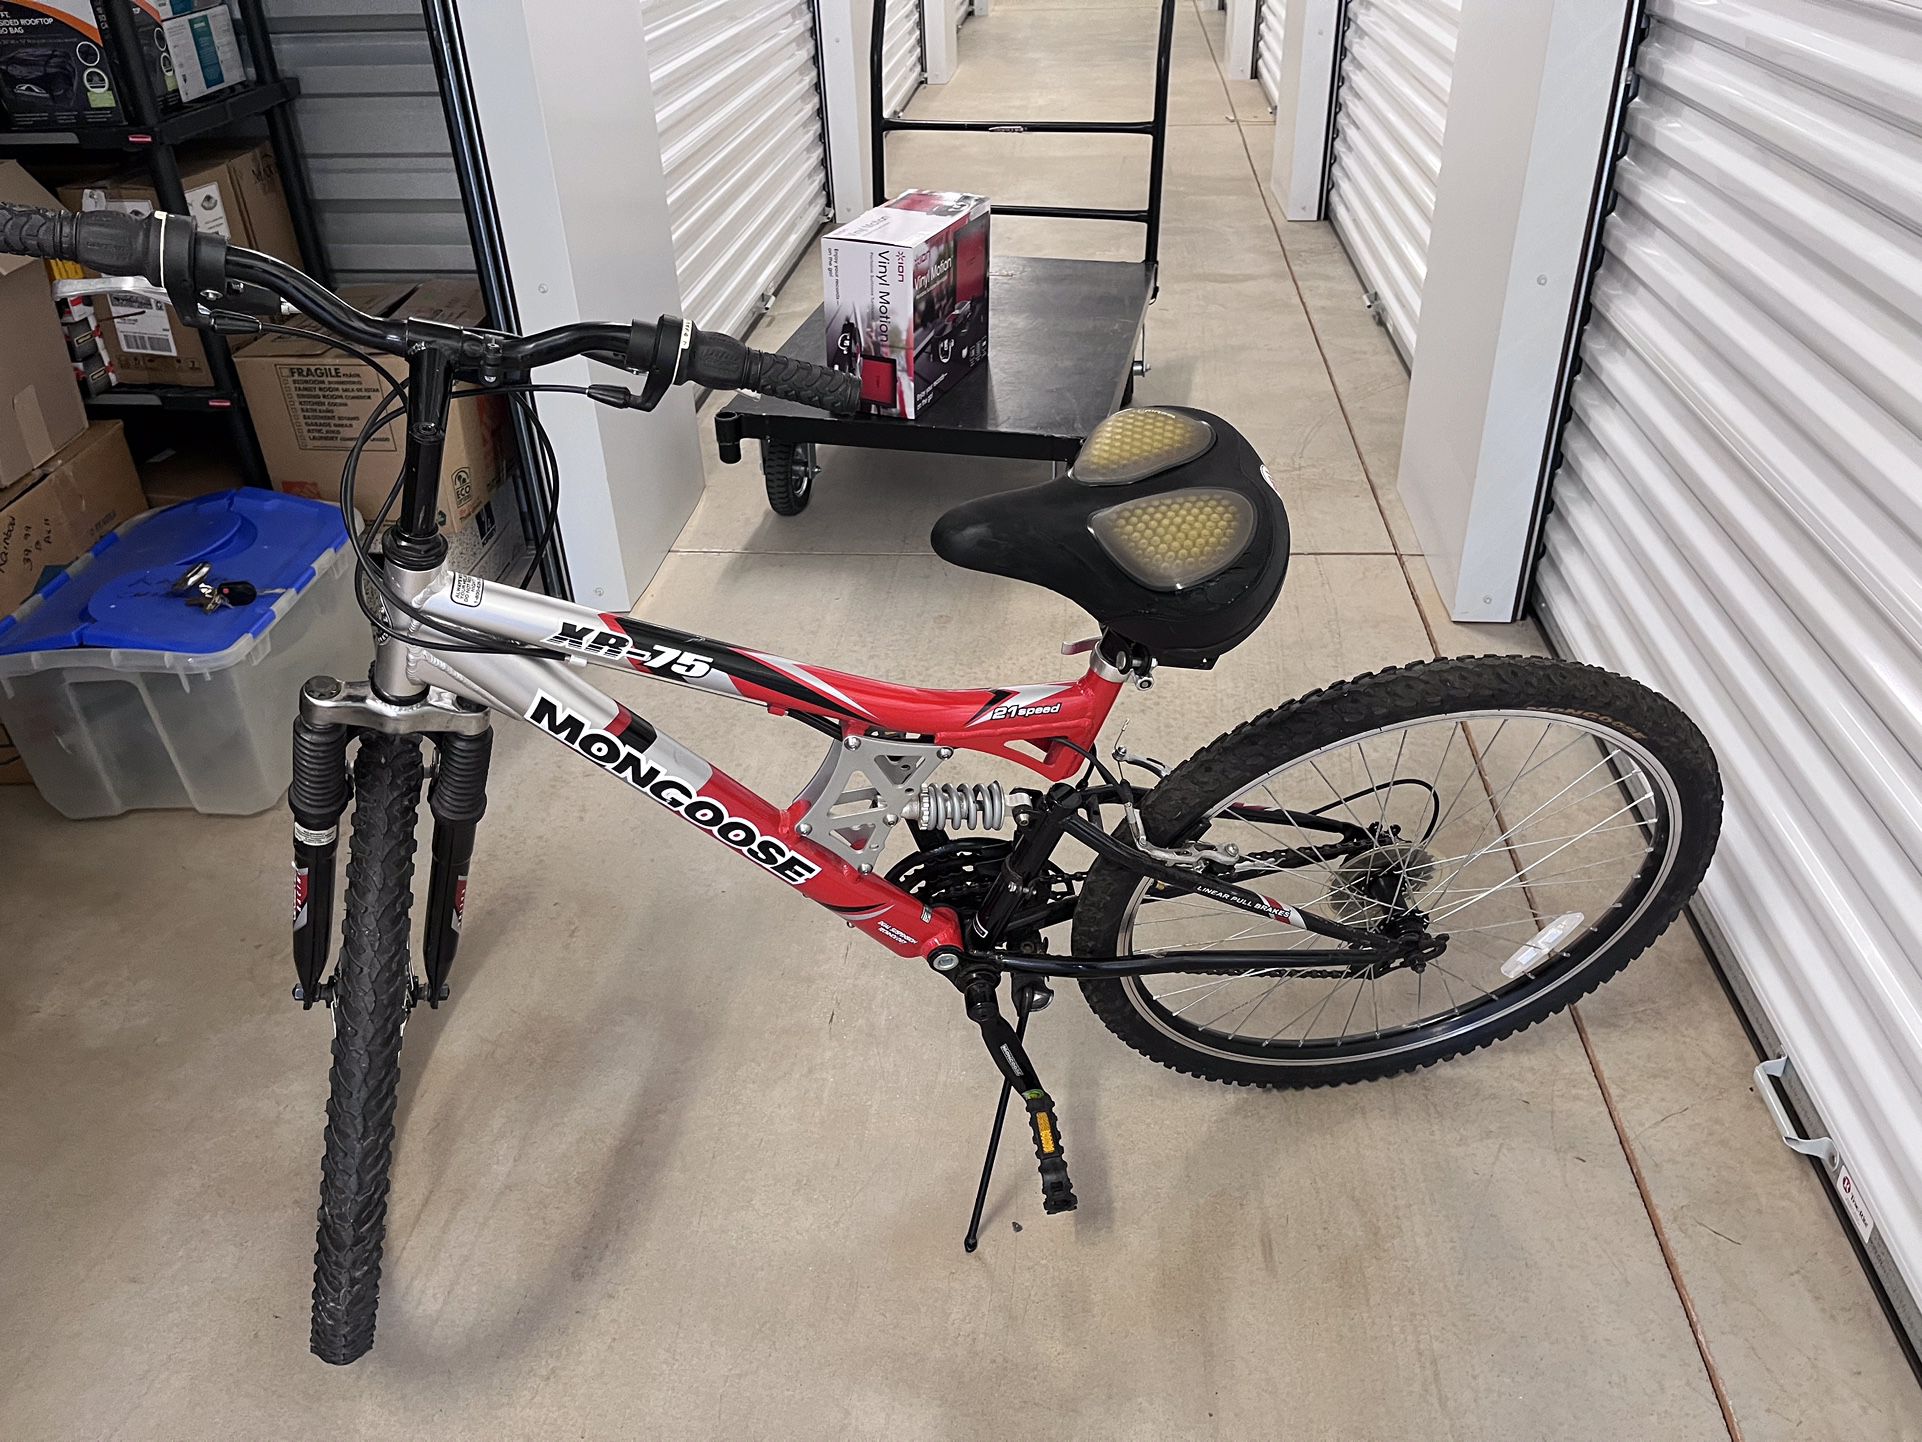 Mongoose XR-75 Mountain Bike 26” Excellent Condition Red